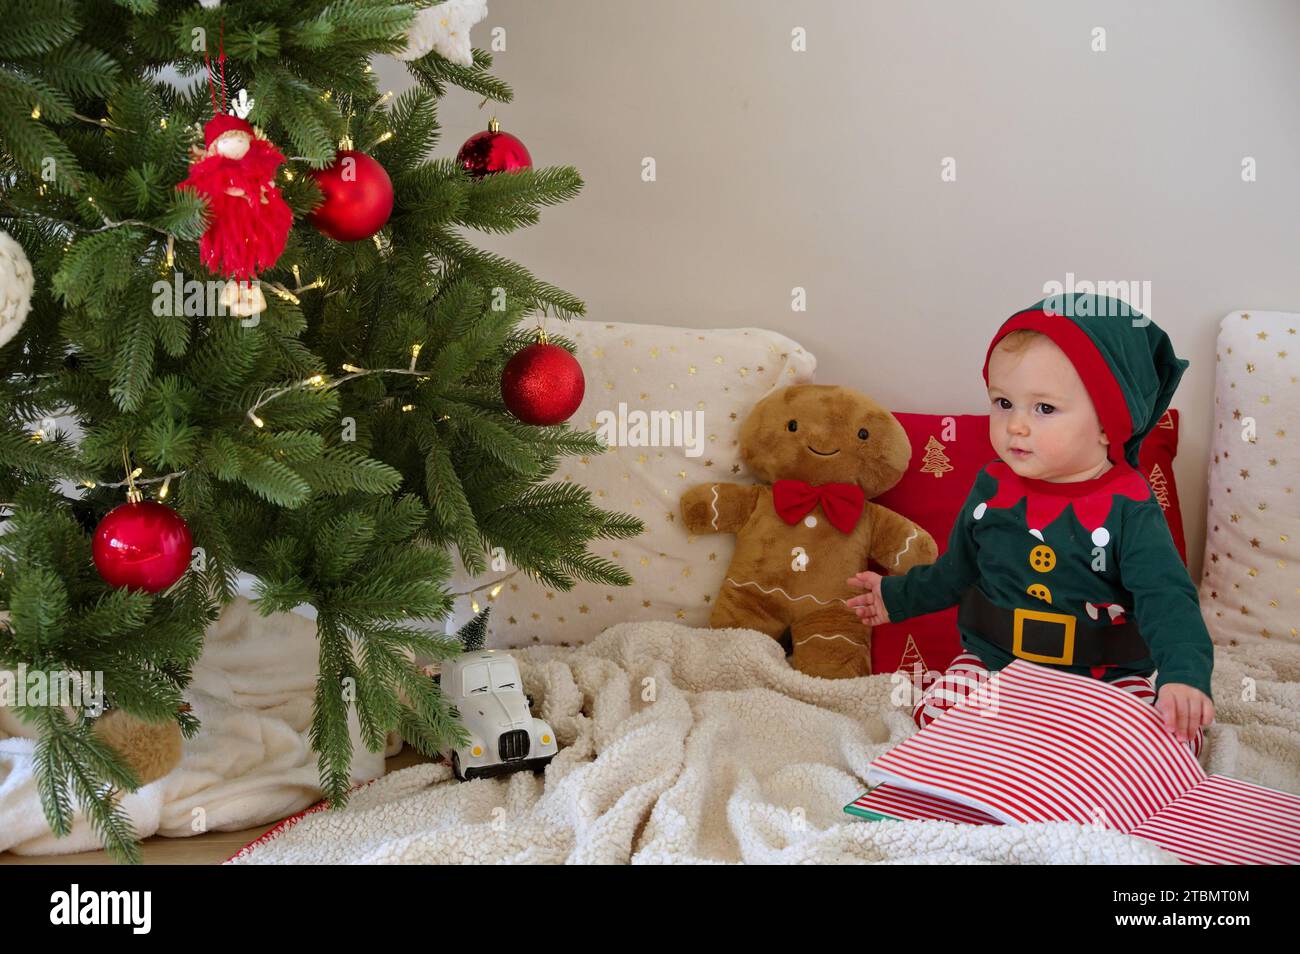 Baby girl dressed as elf sitting in front of Christmas tree Stock Photo